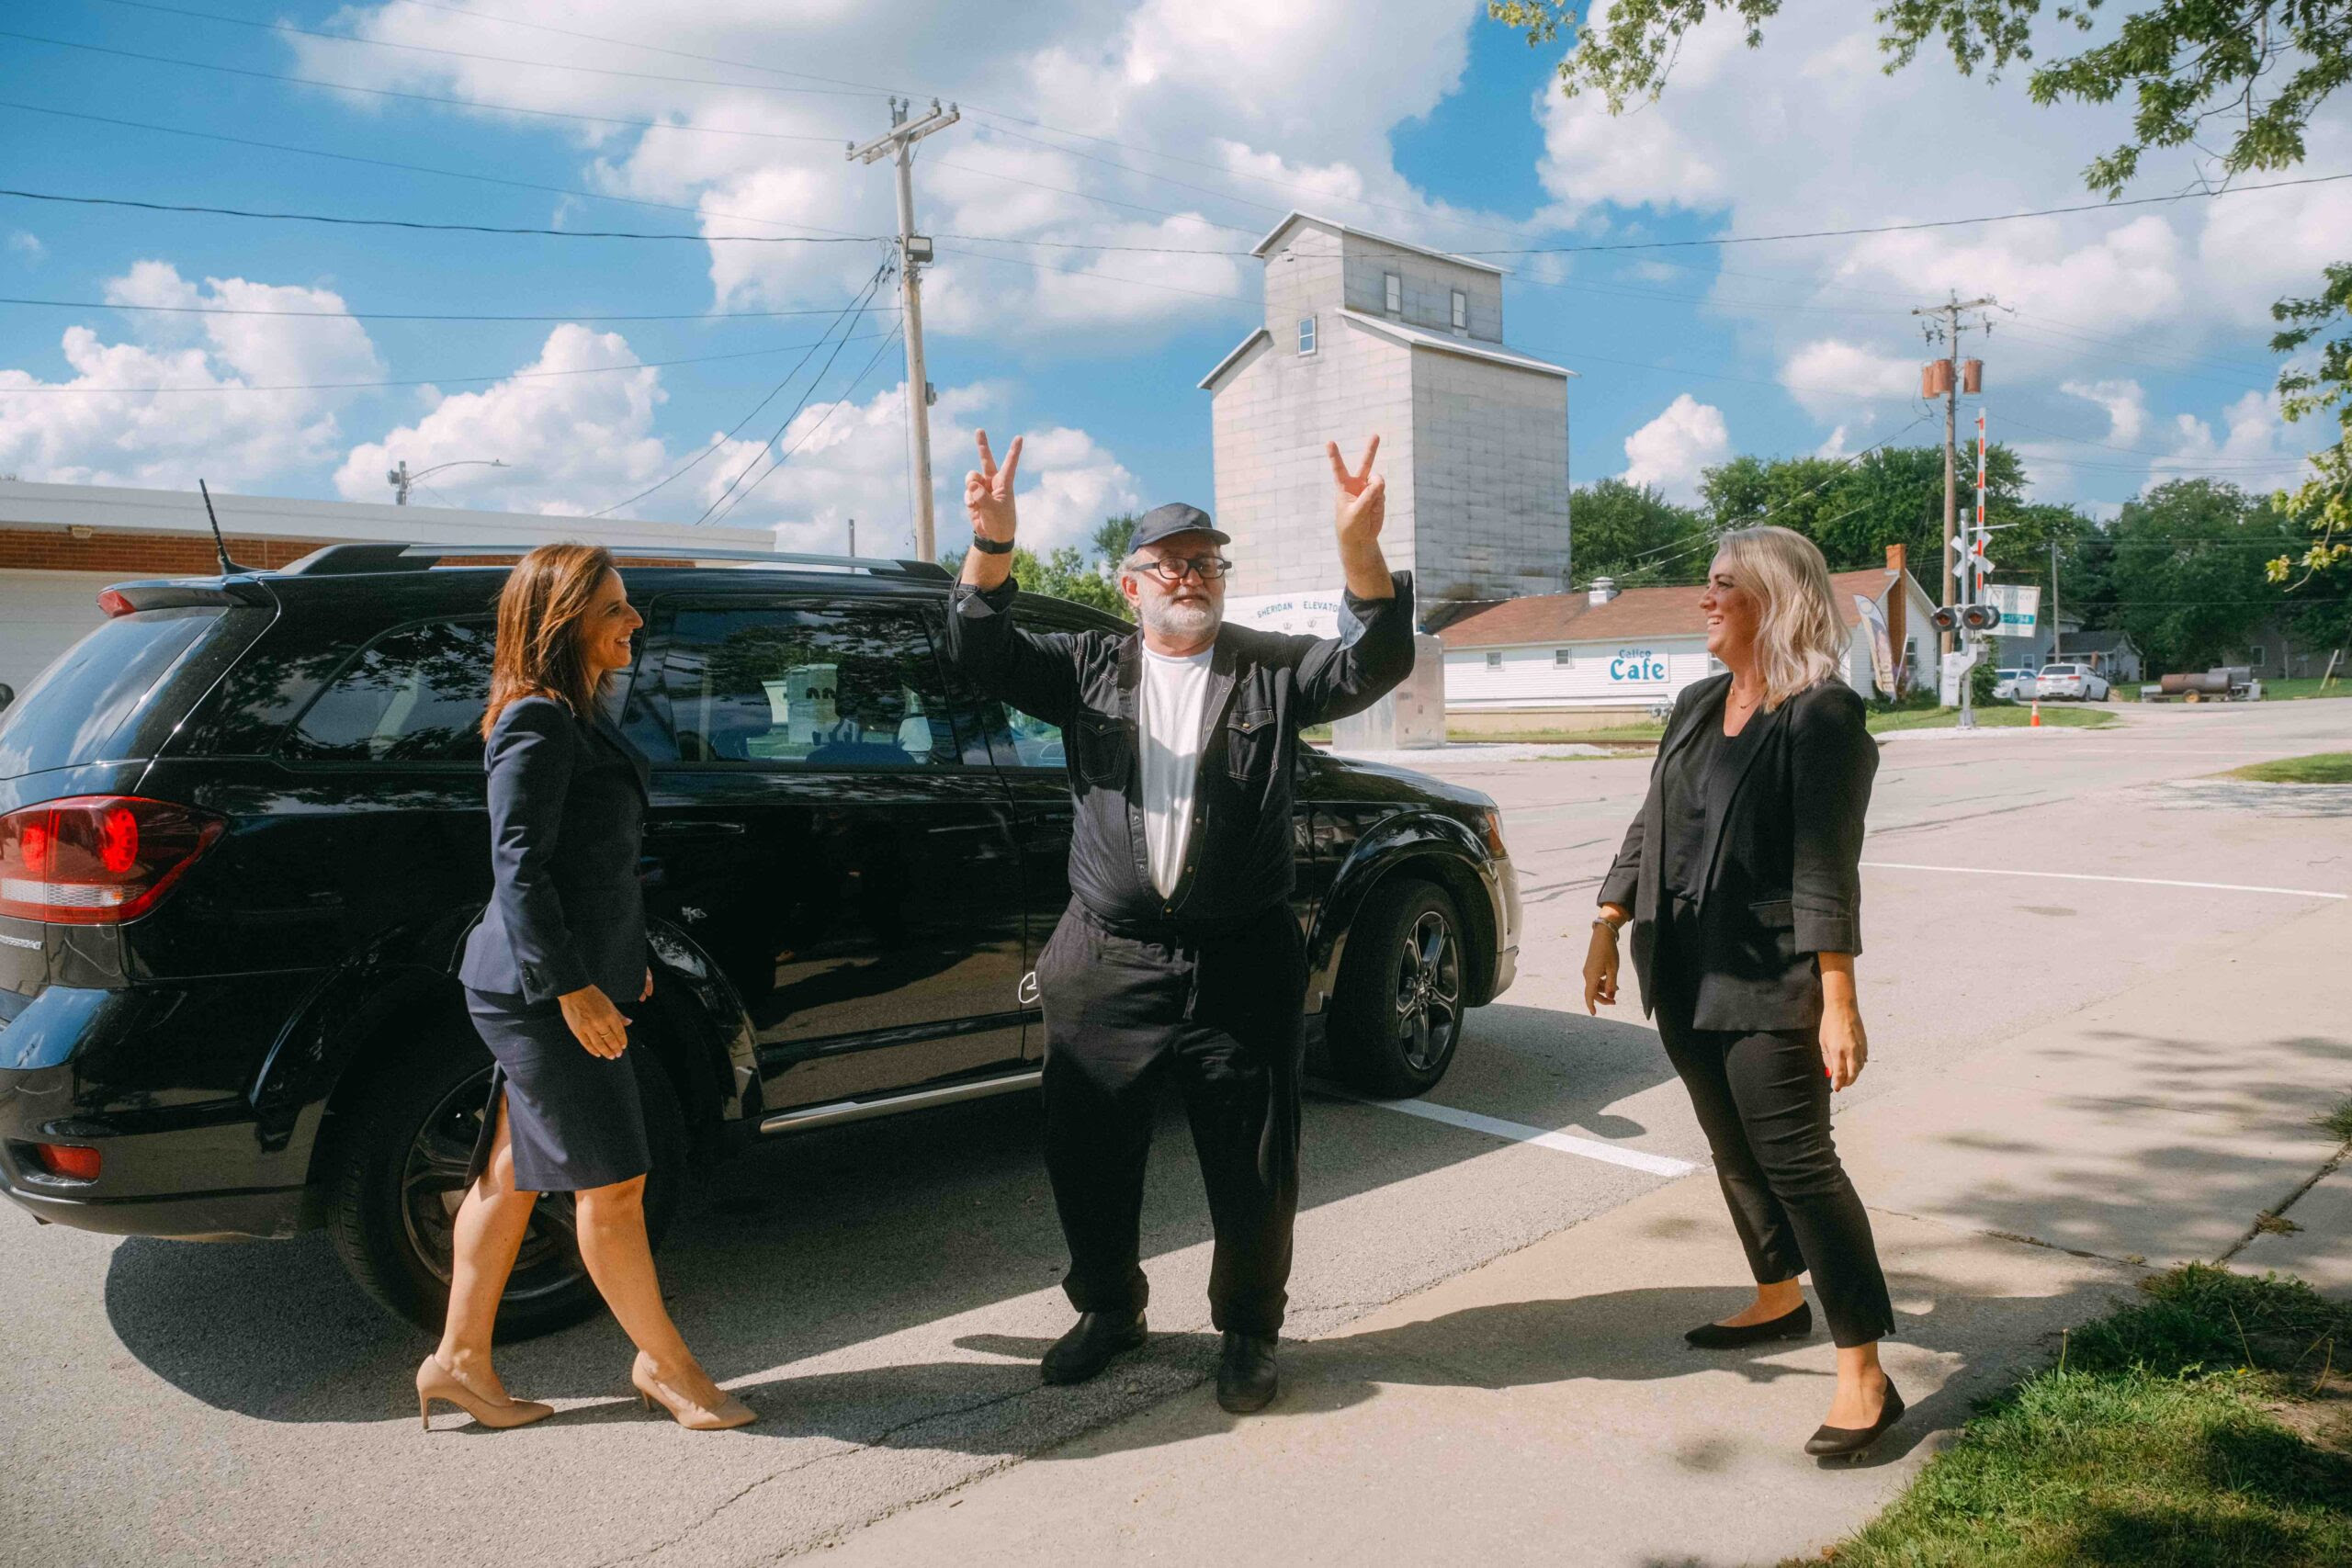 Herman Williams, pictured with his Innocence Project attorney Vanessa Potkin and Illinois Innocence Project attorney Lauren Kaeseberg, was exonerated and released from an Illinois prison Sept. 6, 2022 after 29 years. (Image: Ray Abercrombie for the Innocence Project)